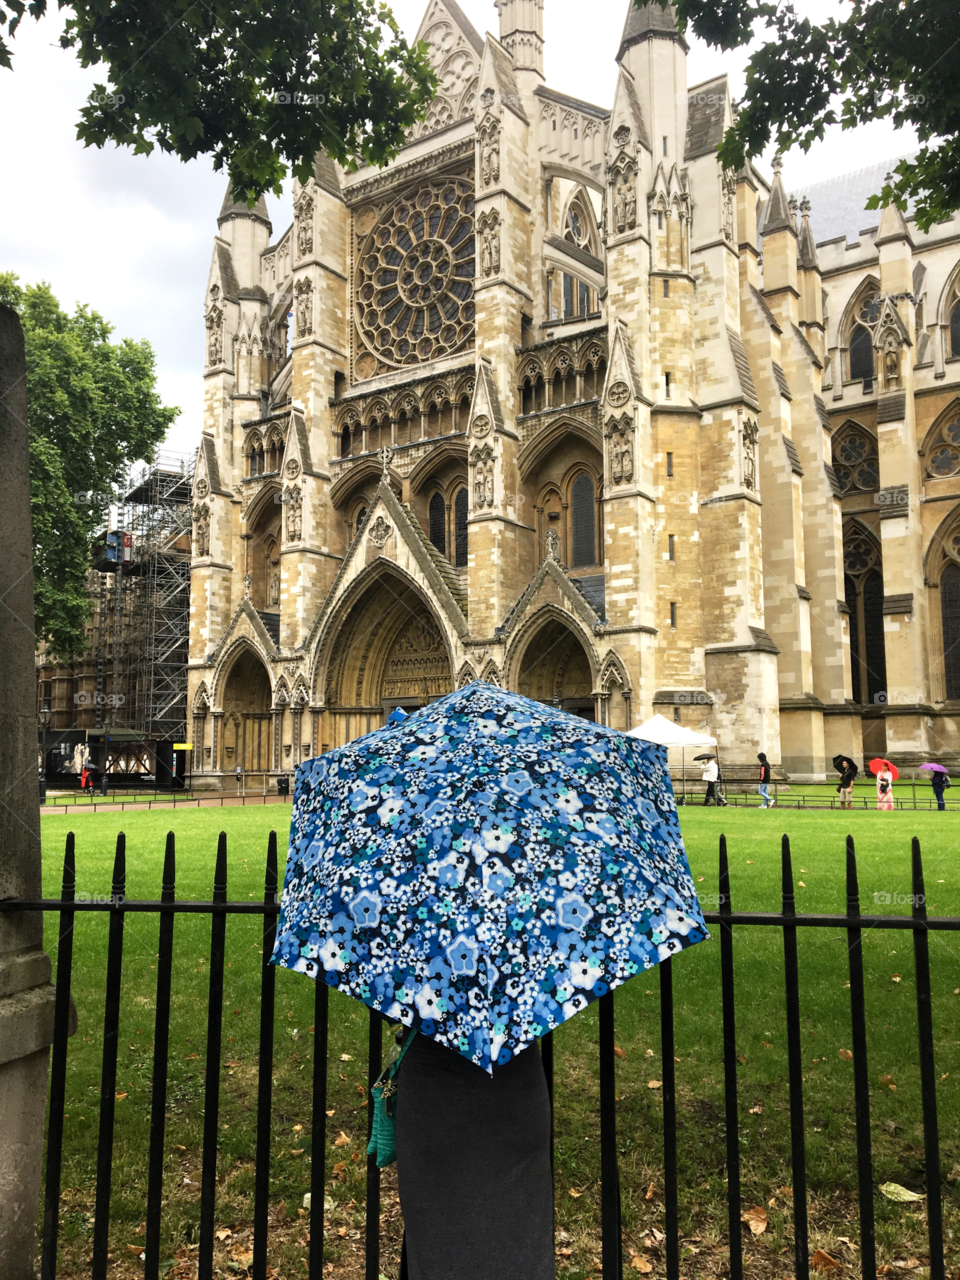 A blue floral umbrella in front of the Westminster abbey in London 